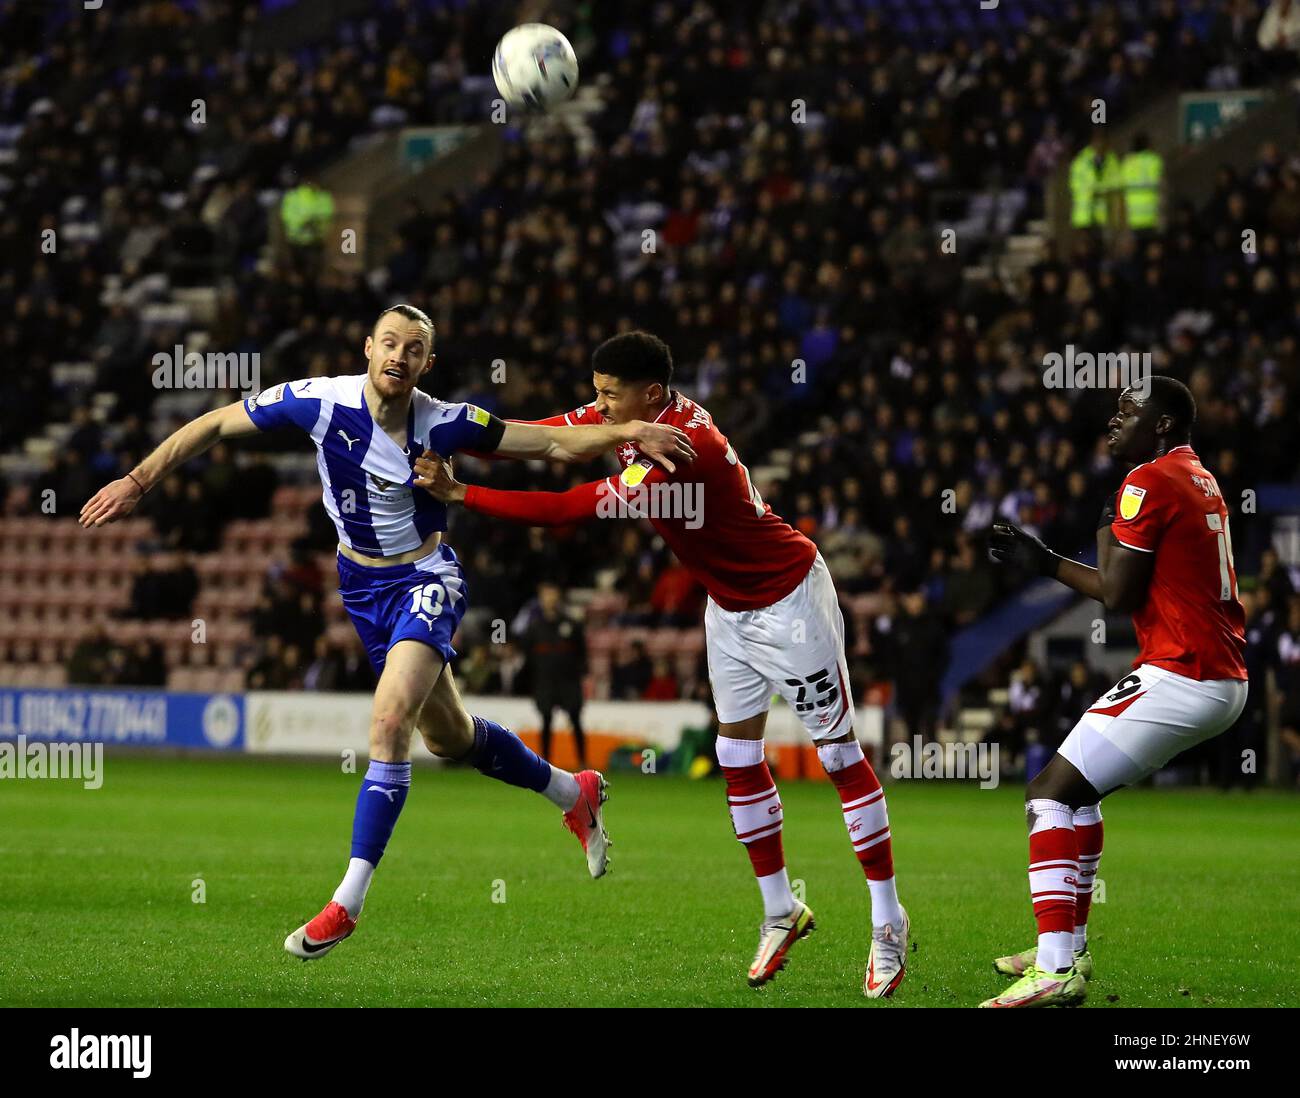 Wigan, UK. 15th Feb, 2022. Will Keane of Wigan Athletic during the Sky Bet League One match between Wigan Athletic and Crewe Alexandra at DW Stadium on February 15th 2022 in Wigan, England. (Photo by Tony Taylor/phcimages.com) Credit: PHC Images/Alamy Live News Stock Photo